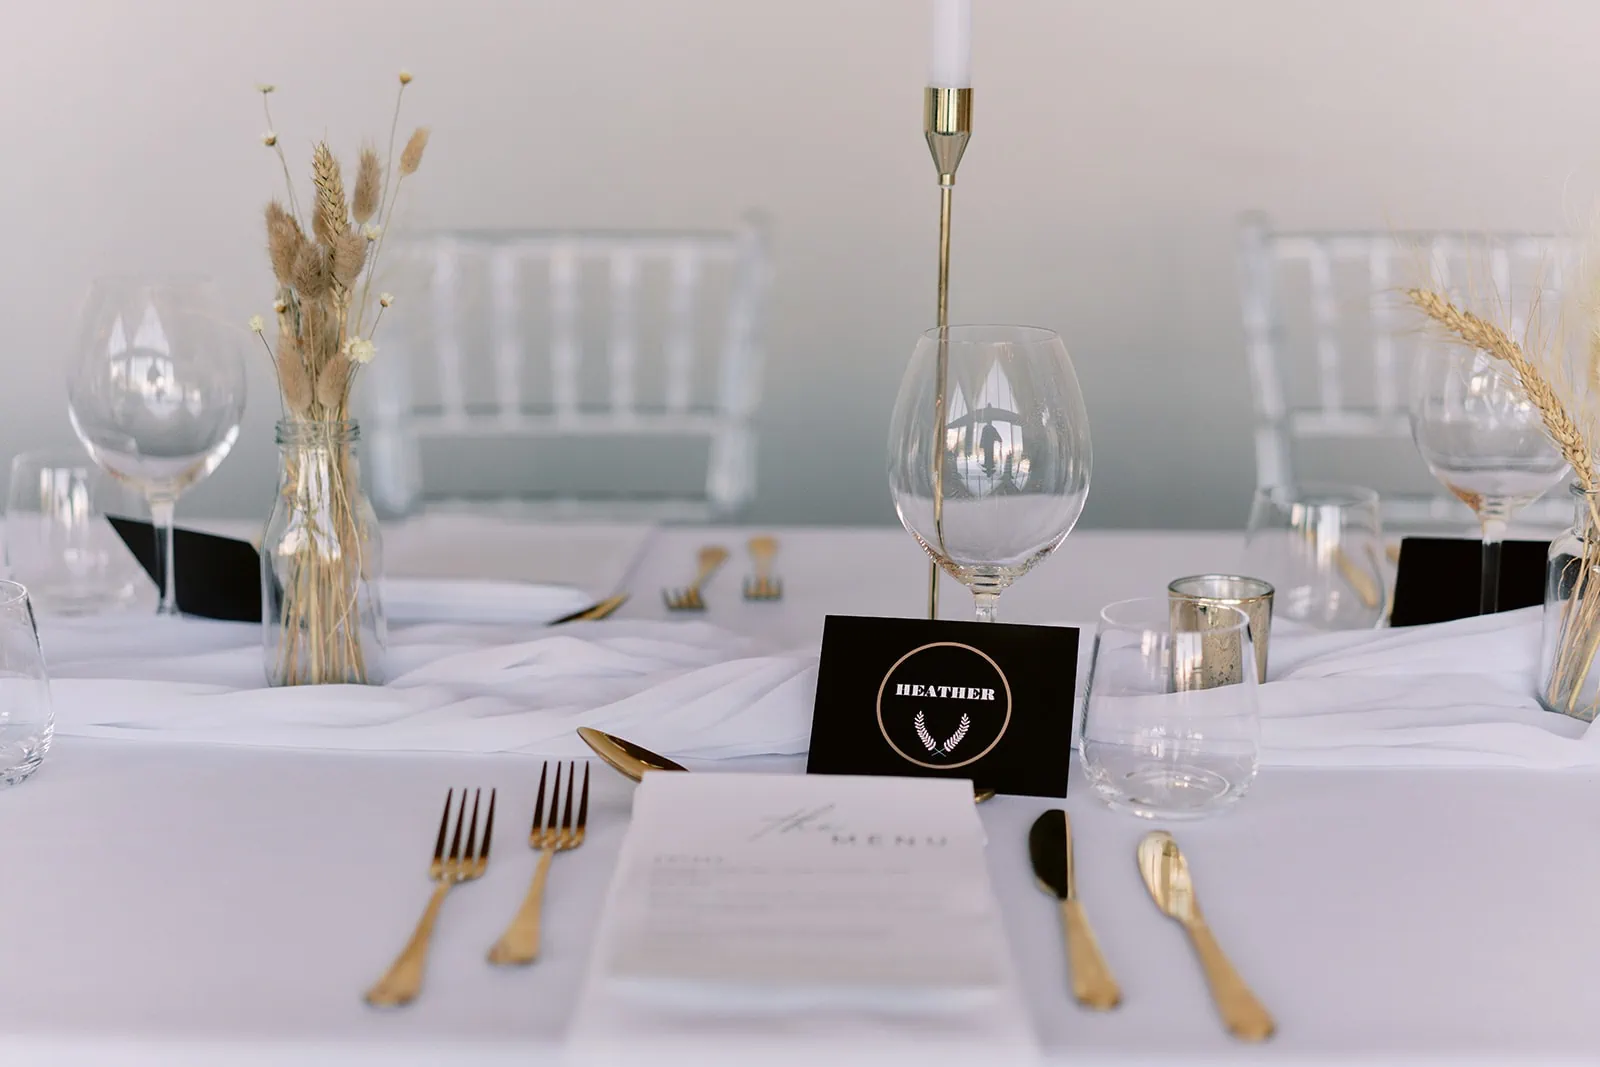 Queenstown Elopement Heli Wedding Photographer クイーンズタウン結婚式 | A table setting at the Kamana Lakehouse with gold and white plates and silverware.